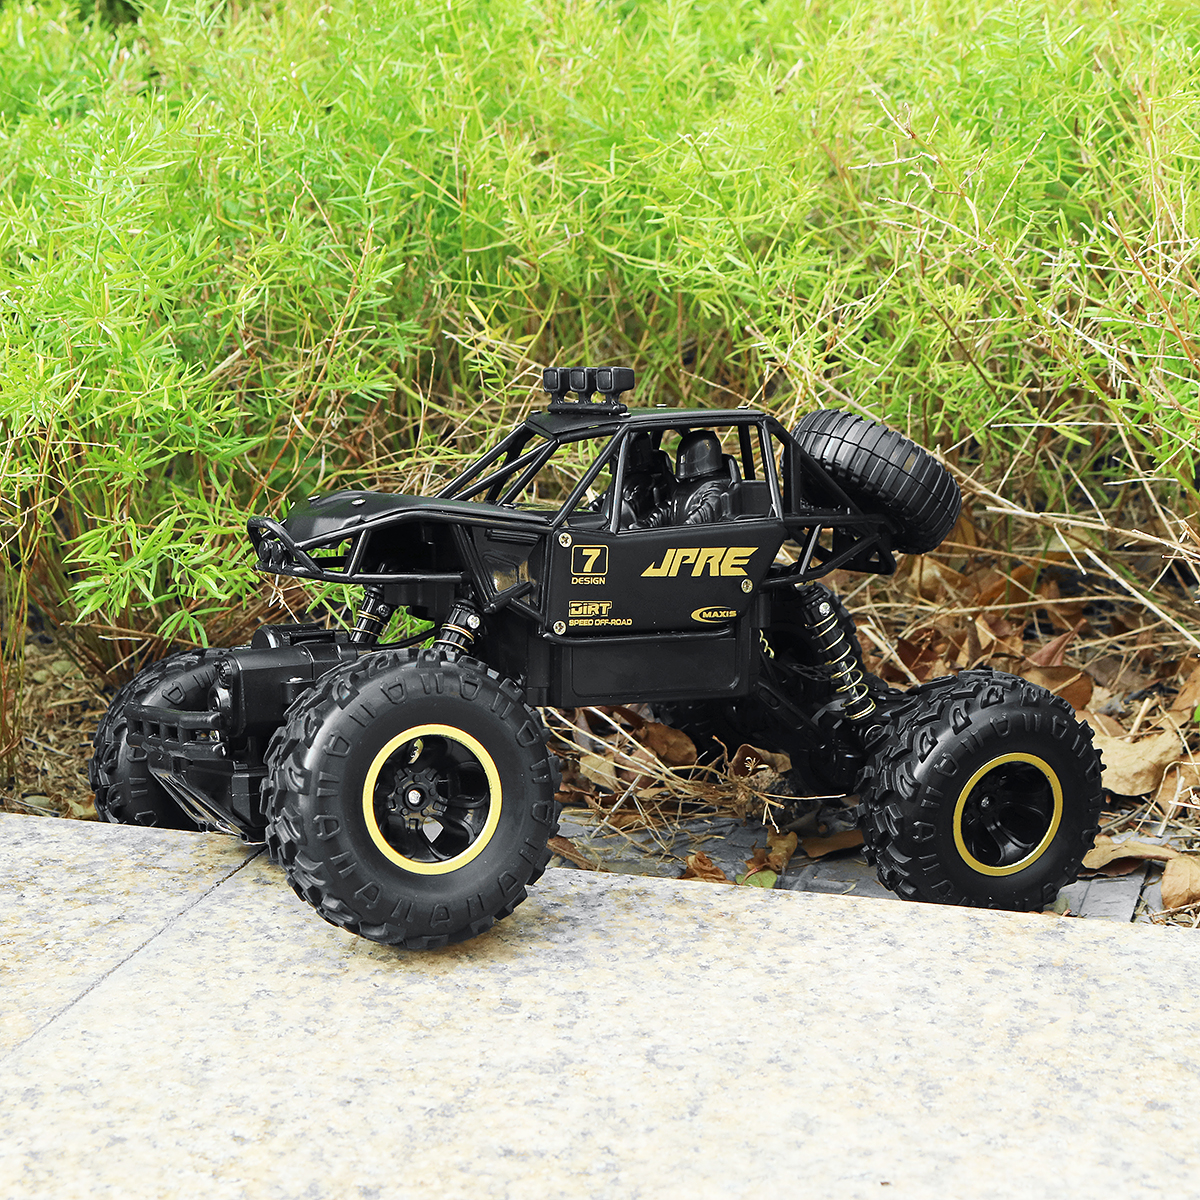 1:16 Alloy Remote Controls Car Monster Trucks, 4WD Climbing RC Cars Off Road, RC Crawler Toys for Boys Kids Gifts - image 8 of 11